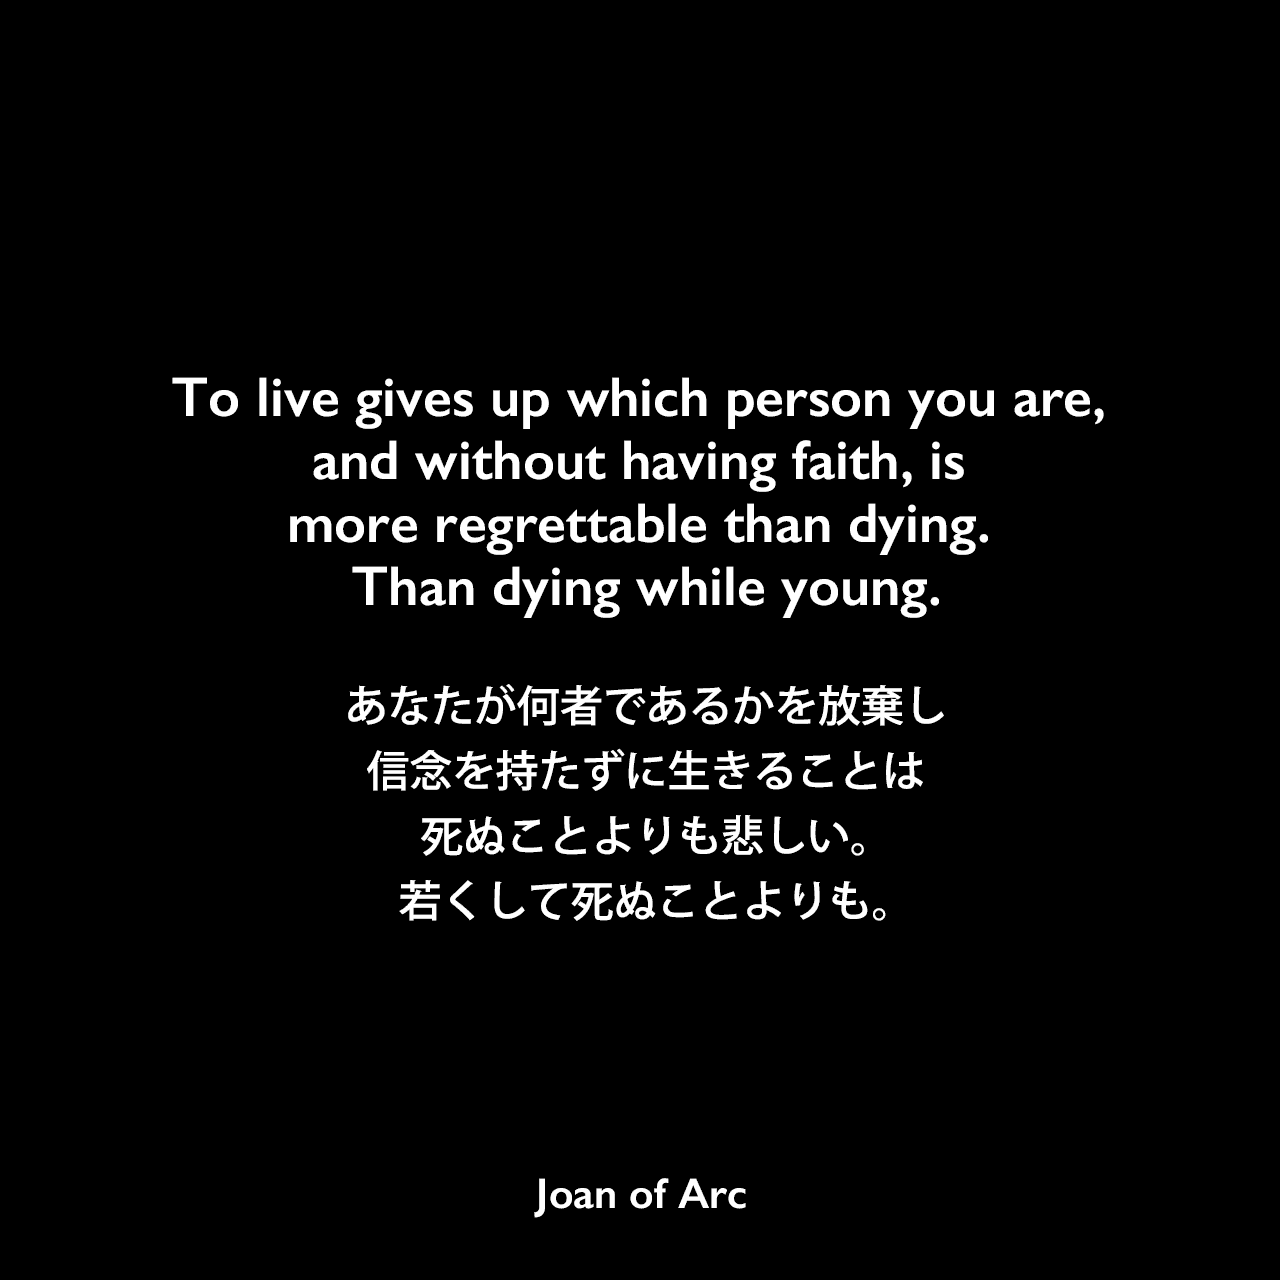 To live gives up which person you are, and without having faith, is more regrettable than dying. Than dying while young.あなたが何者であるかを放棄し、信念を持たずに生きることは、死ぬことよりも悲しい。若くして死ぬことよりも。Joan of Arc